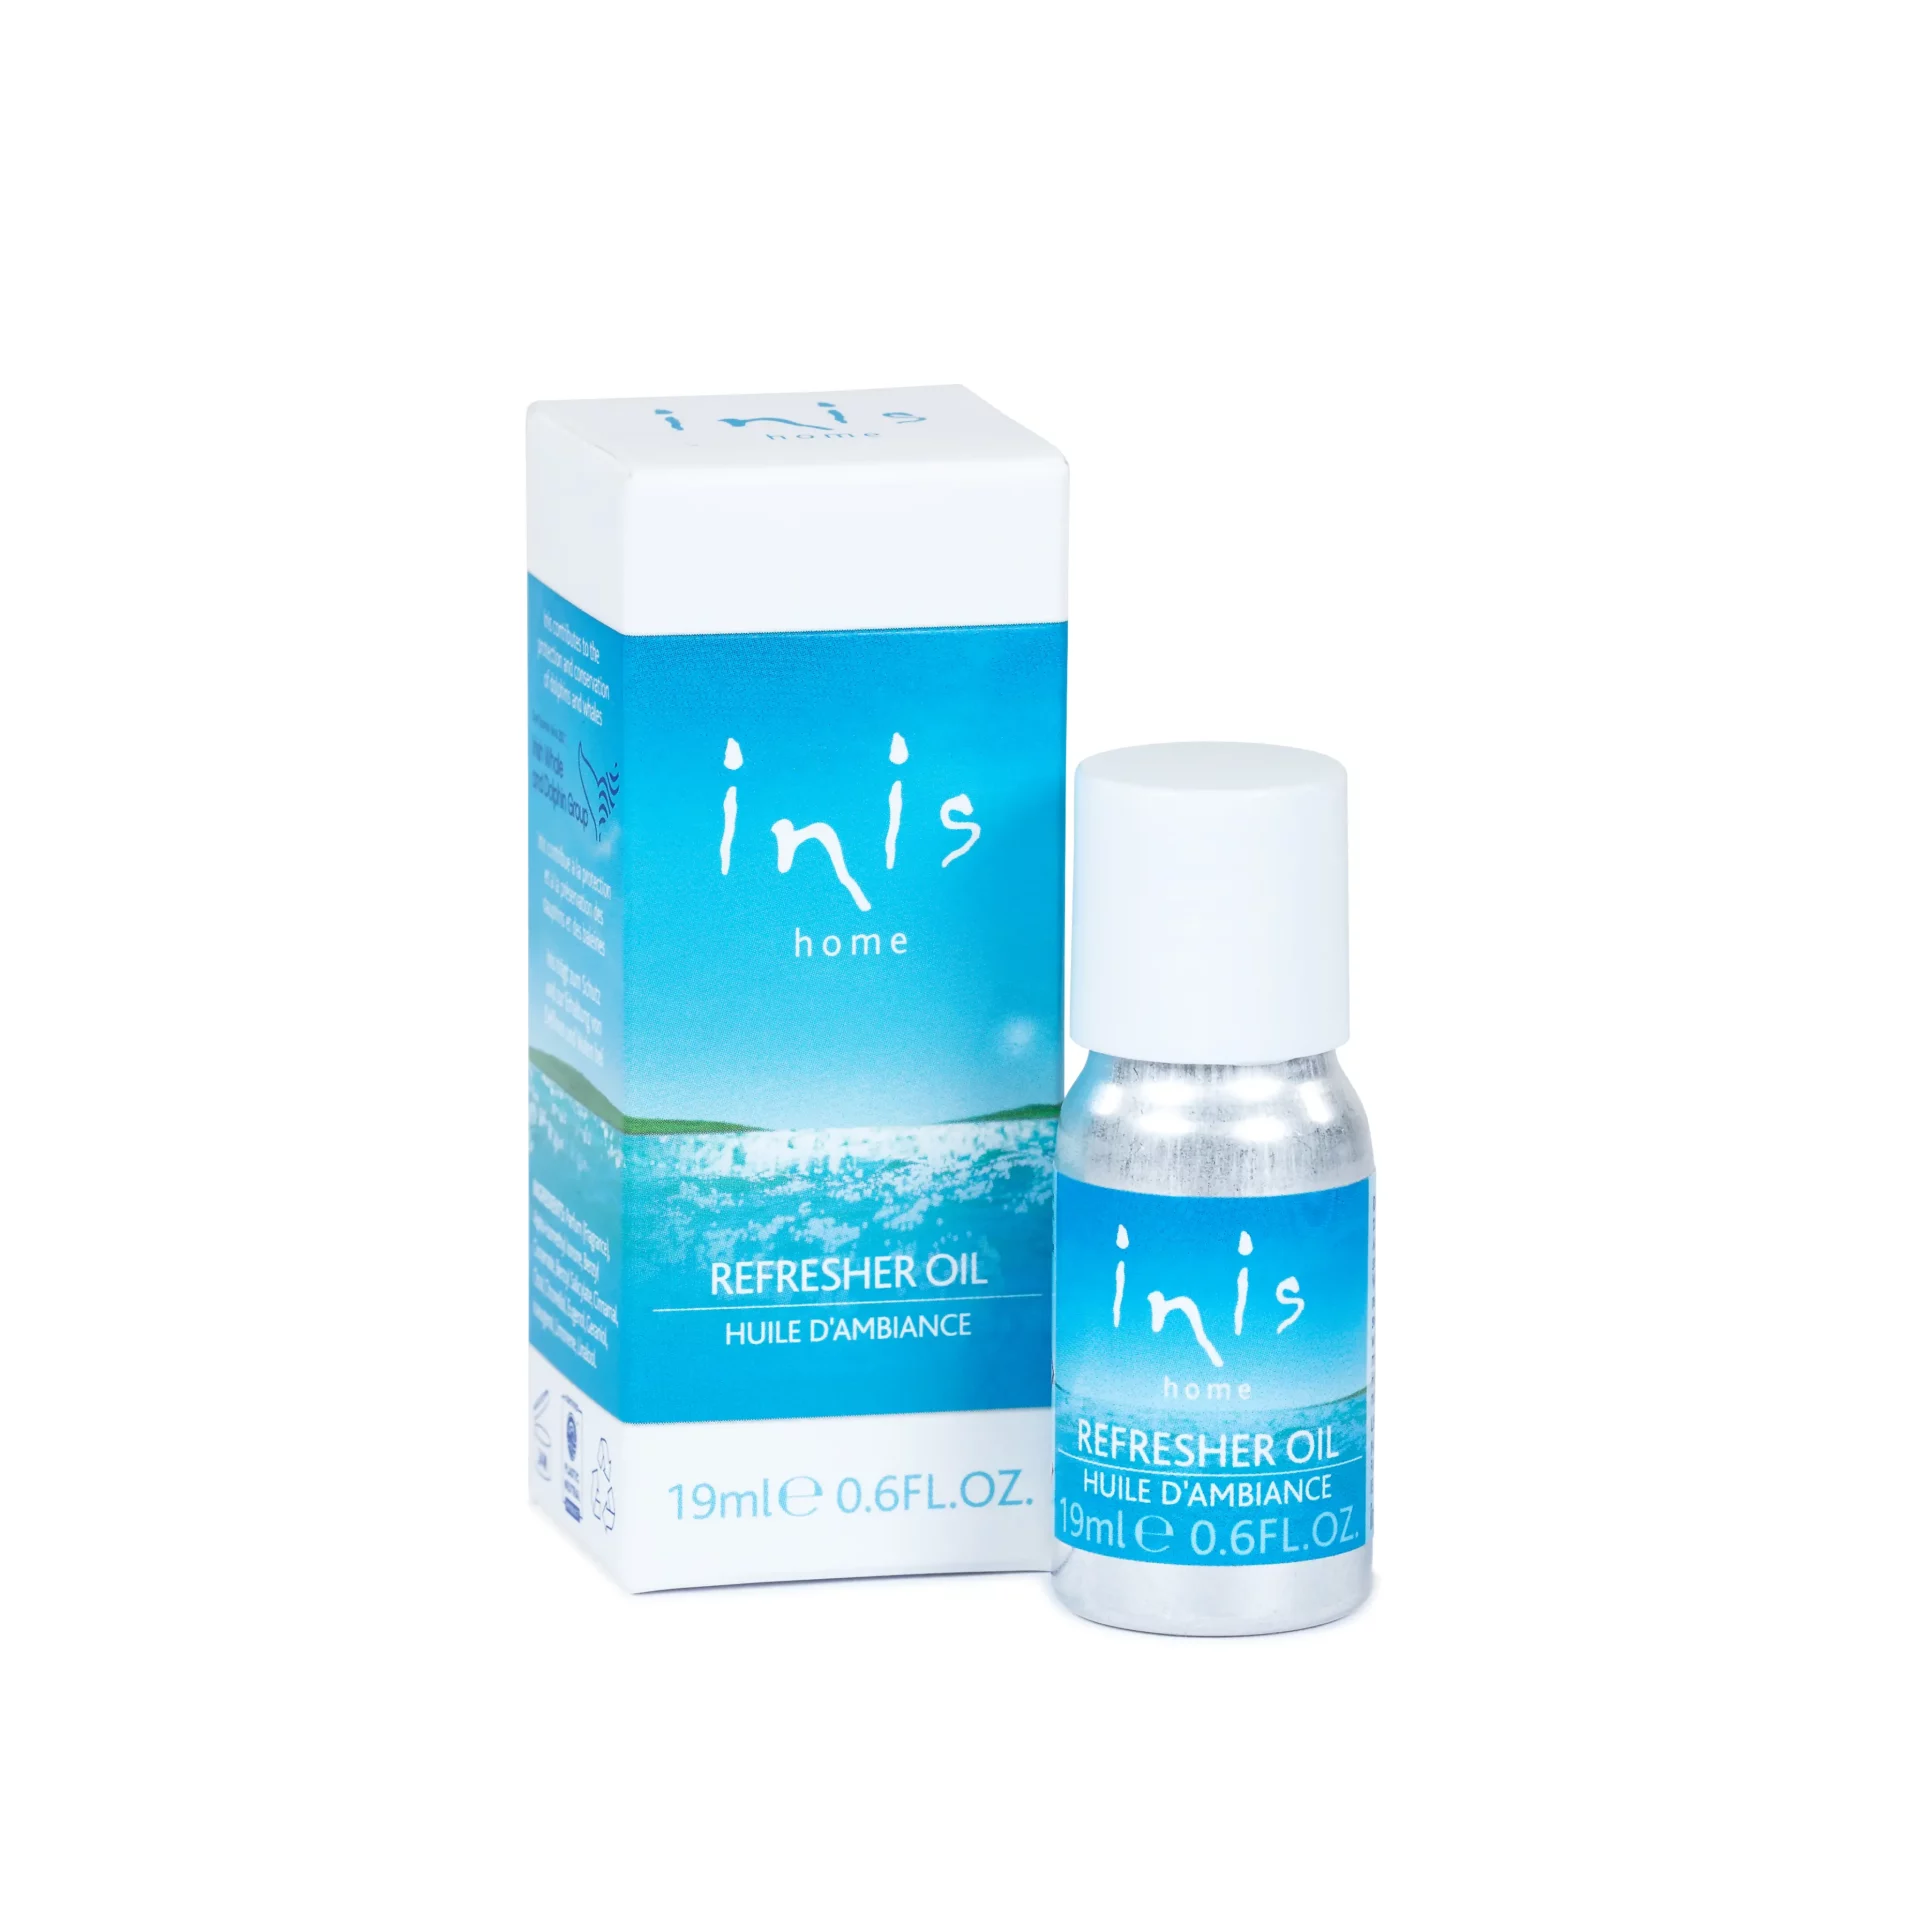 Inis refresher oil by fragrances of ireland